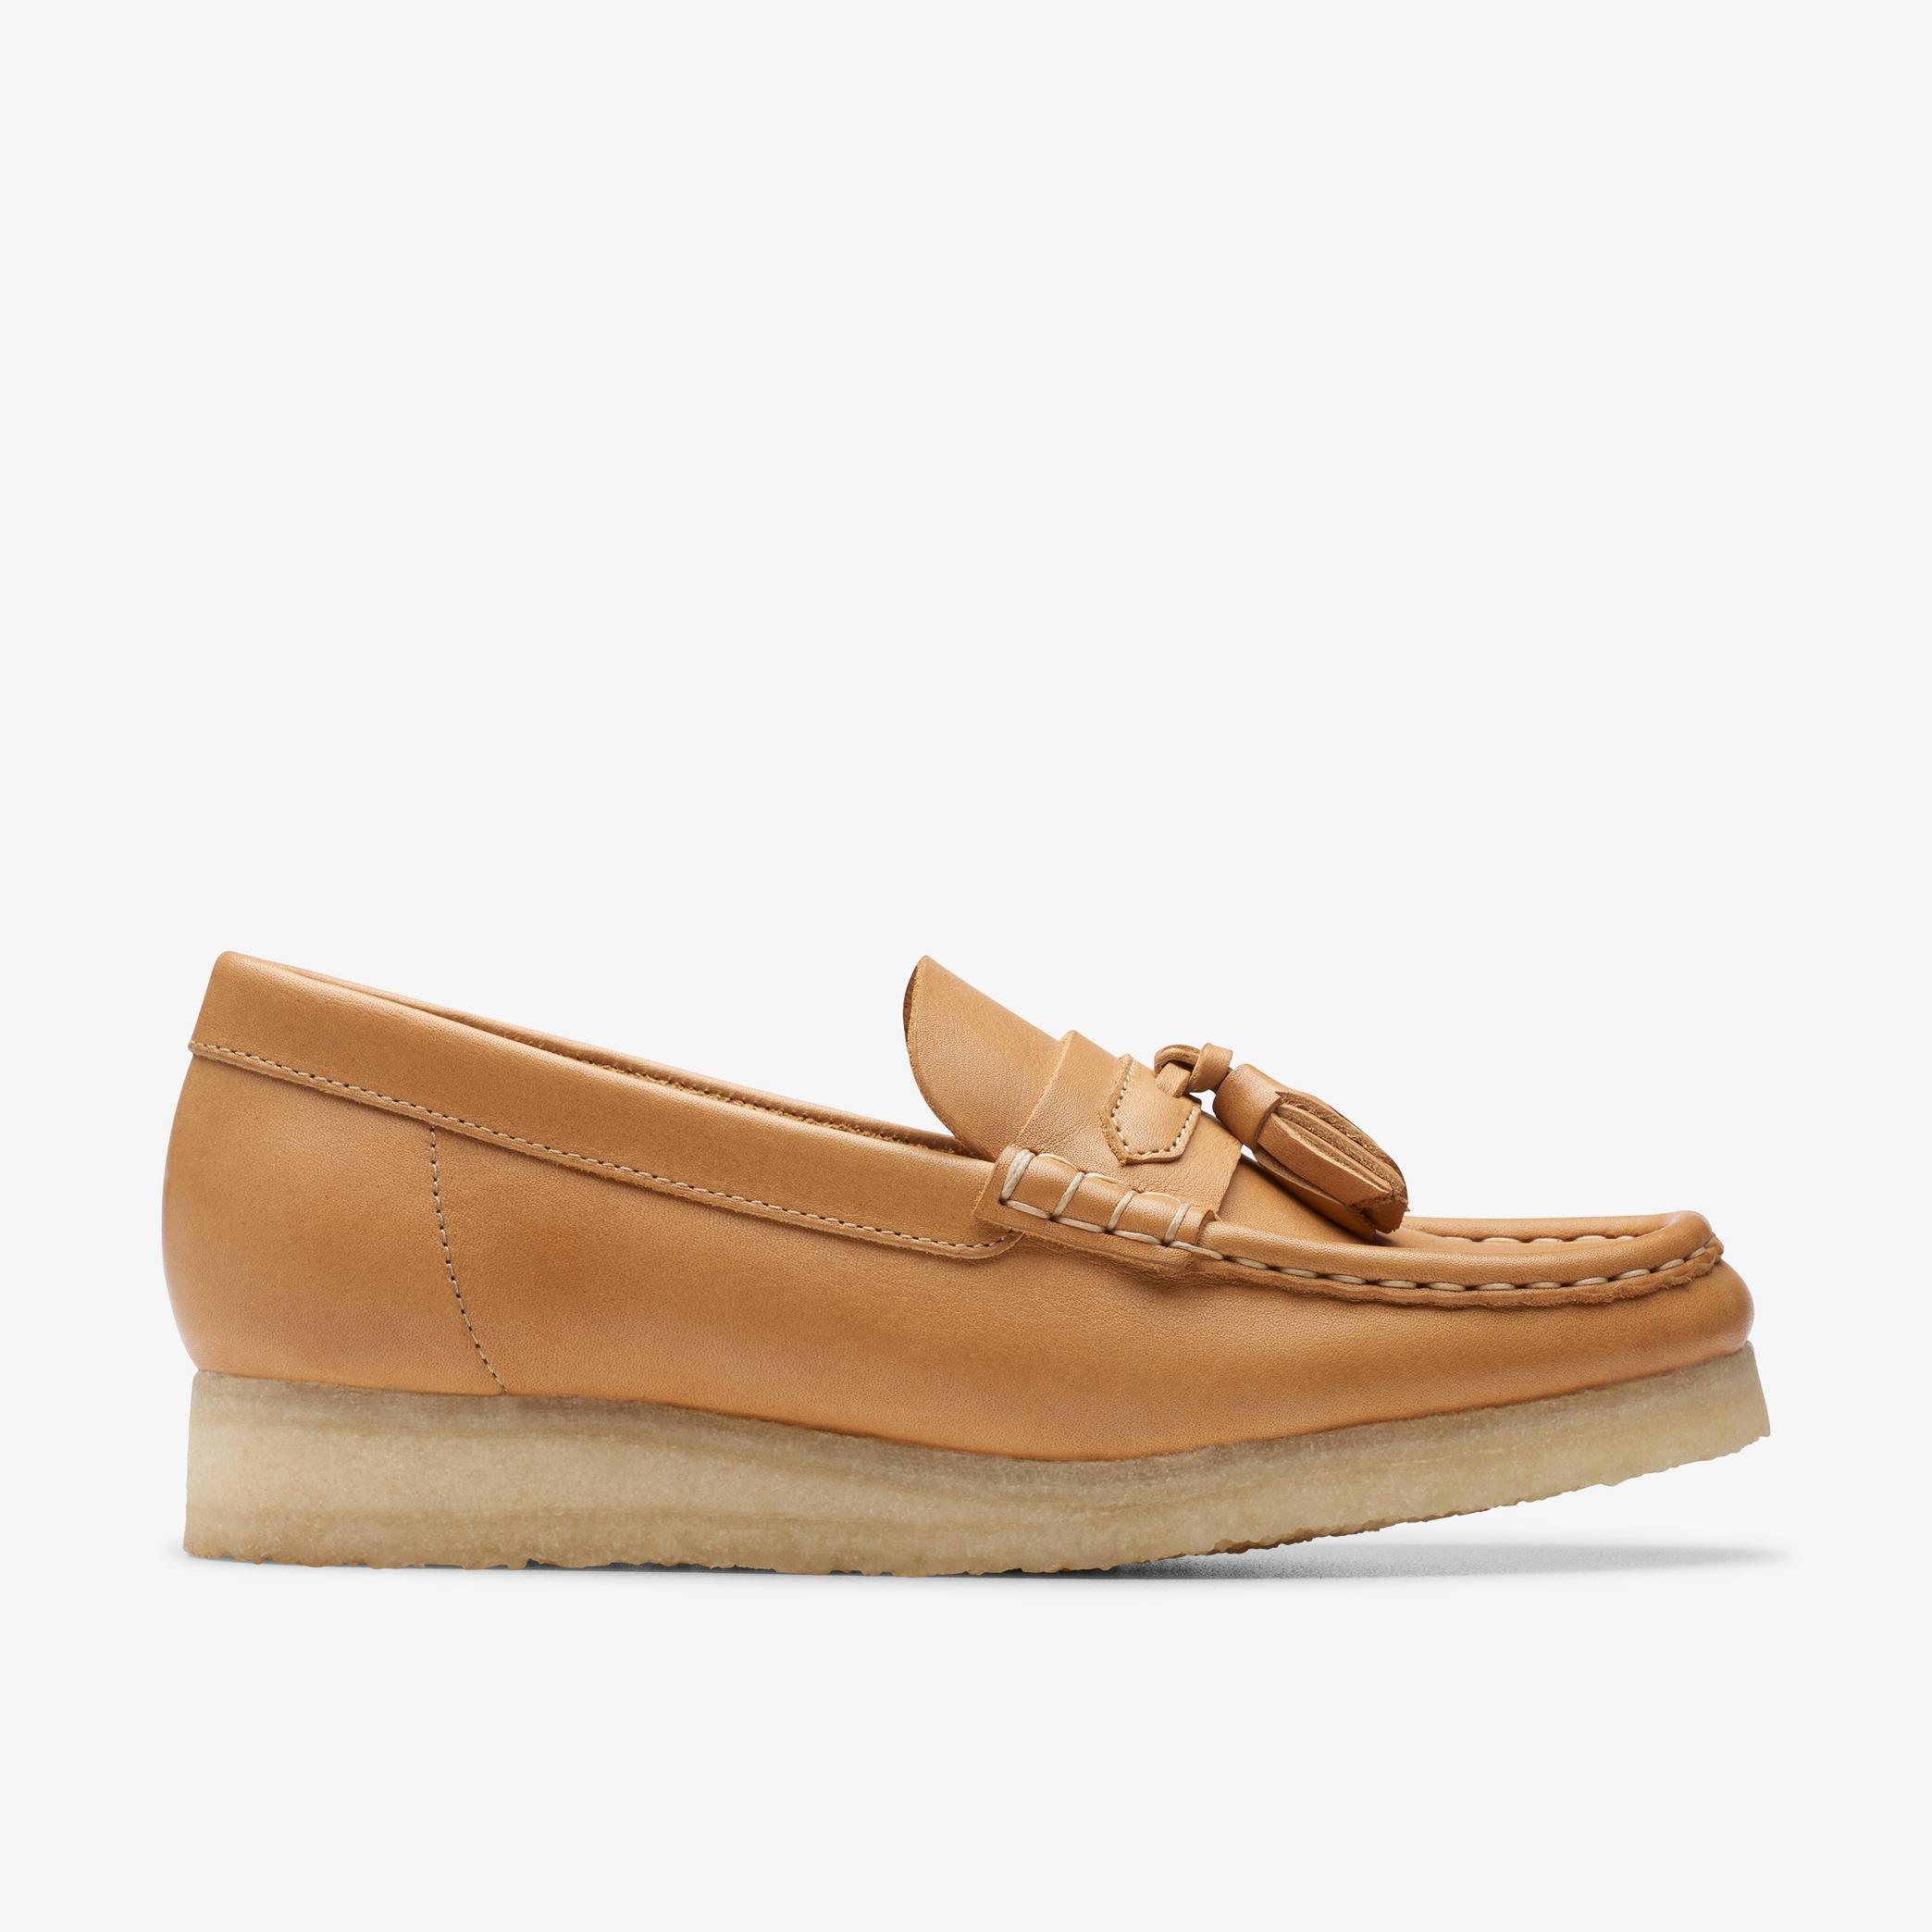 Wallabee Loafer Mid Tan Leather Loafers, view 1 of 7